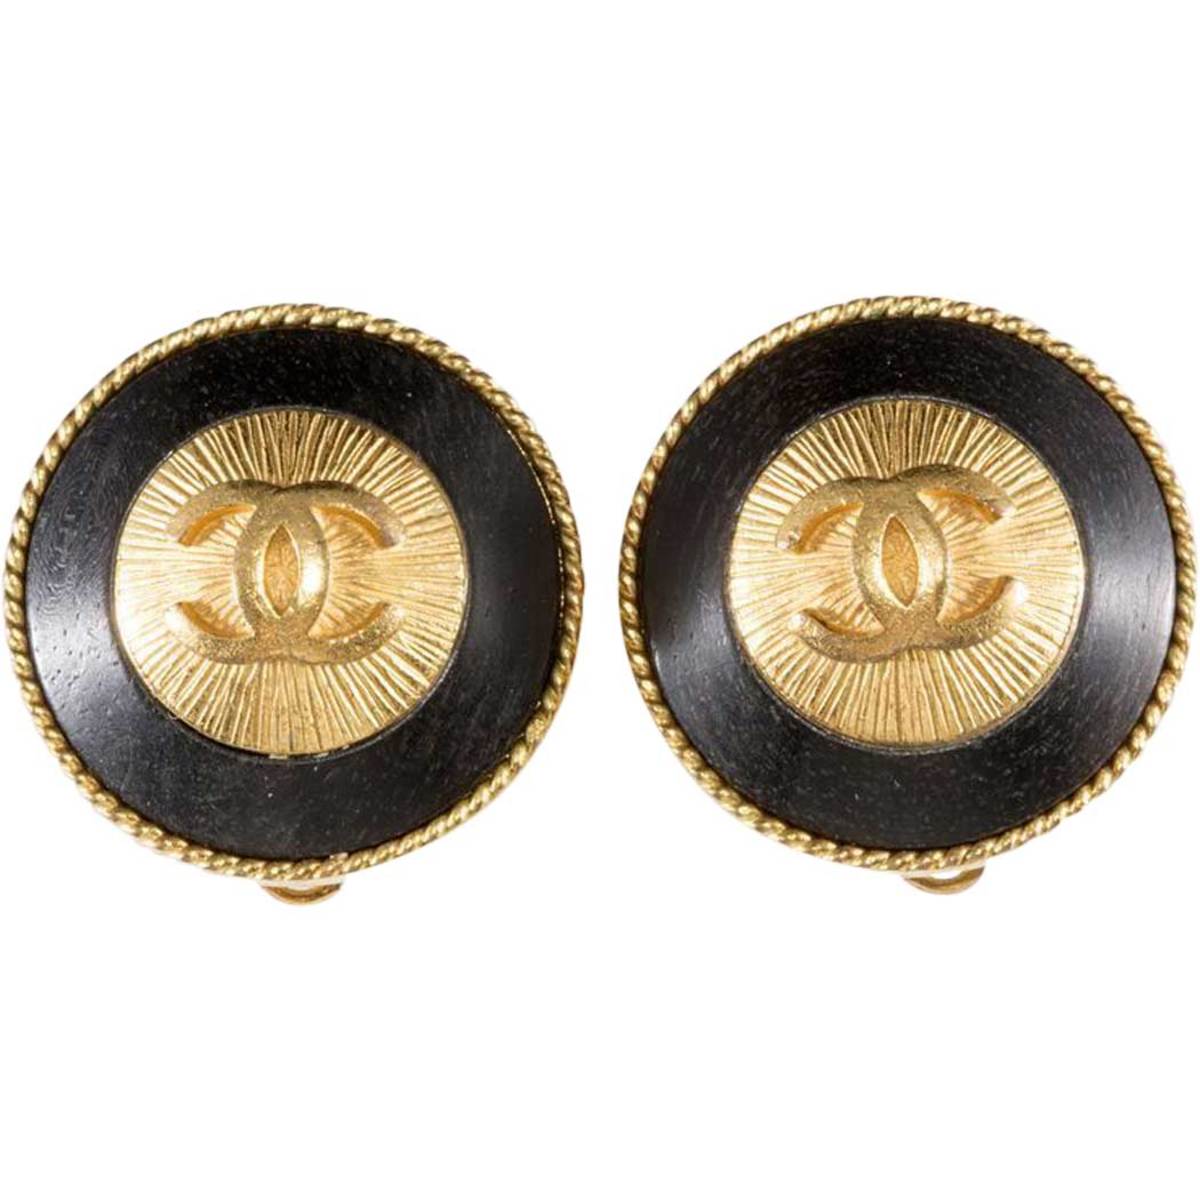 Chanel earrings with dark wood and gold-plated metal, 1993. Value: $300-$400.